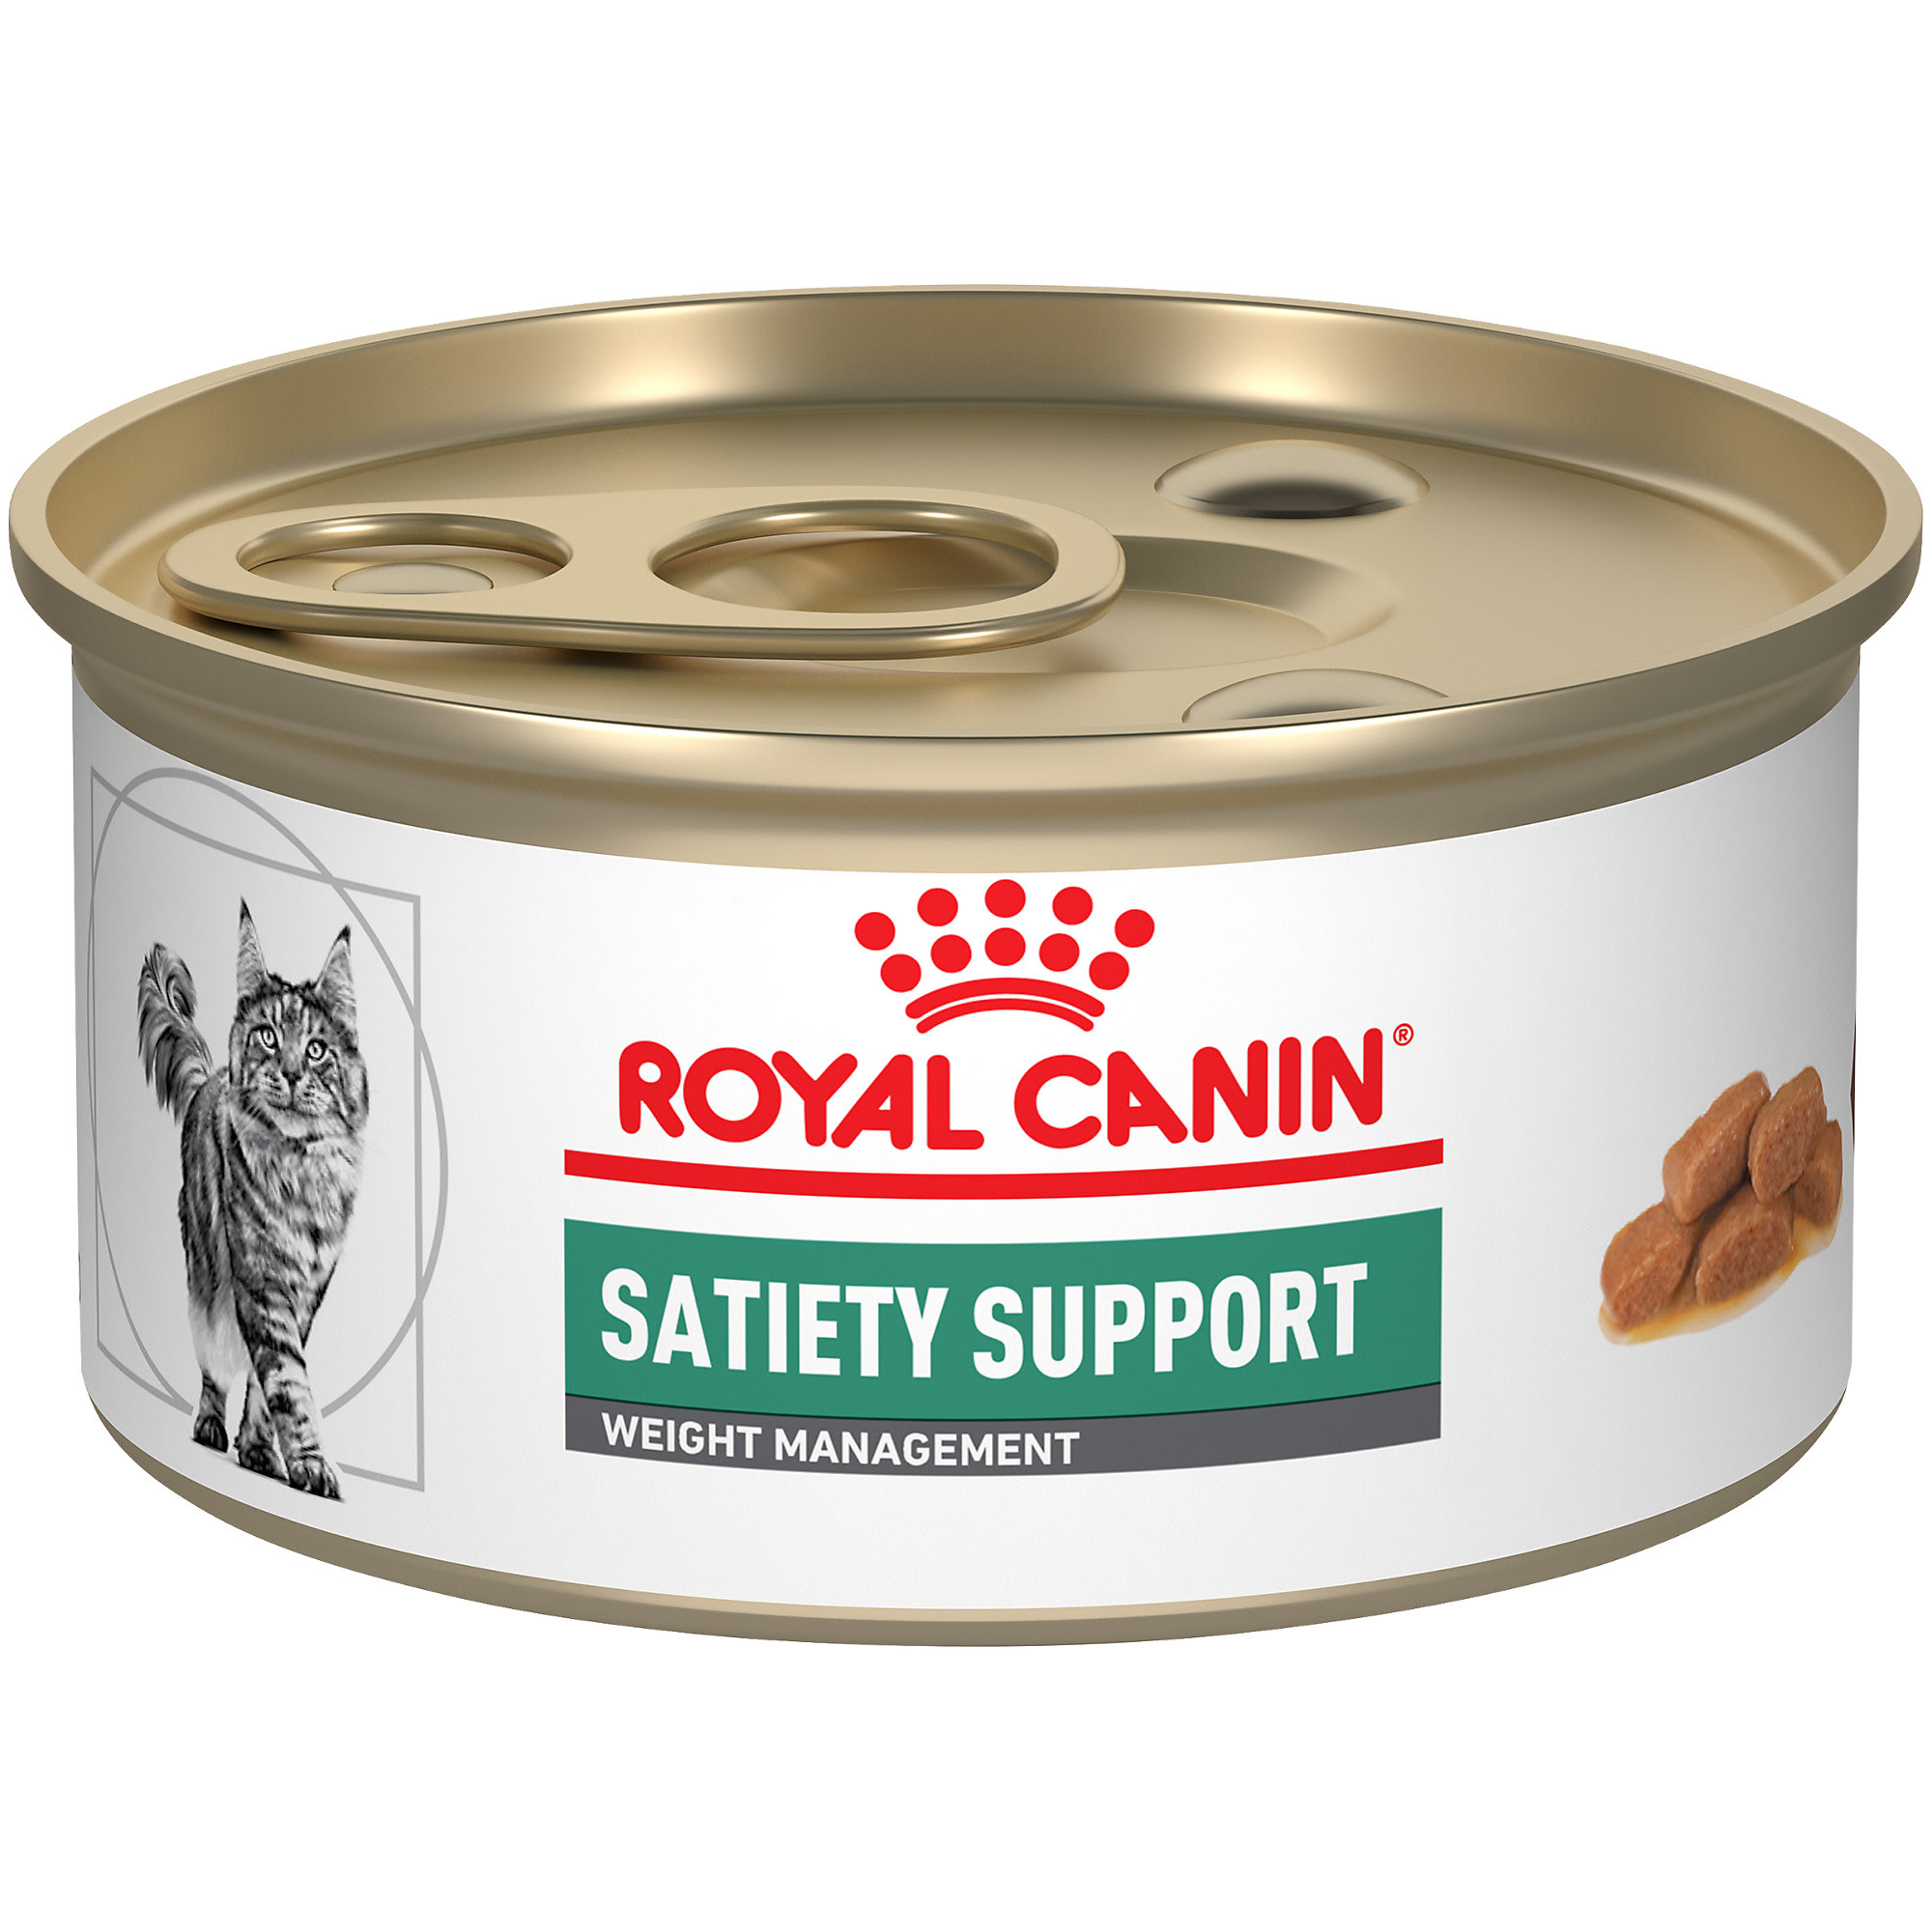 Royal Canin Veterinary Satiety Support Weight Management Food, 3 oz., Case of 24 $62.16 | Petco